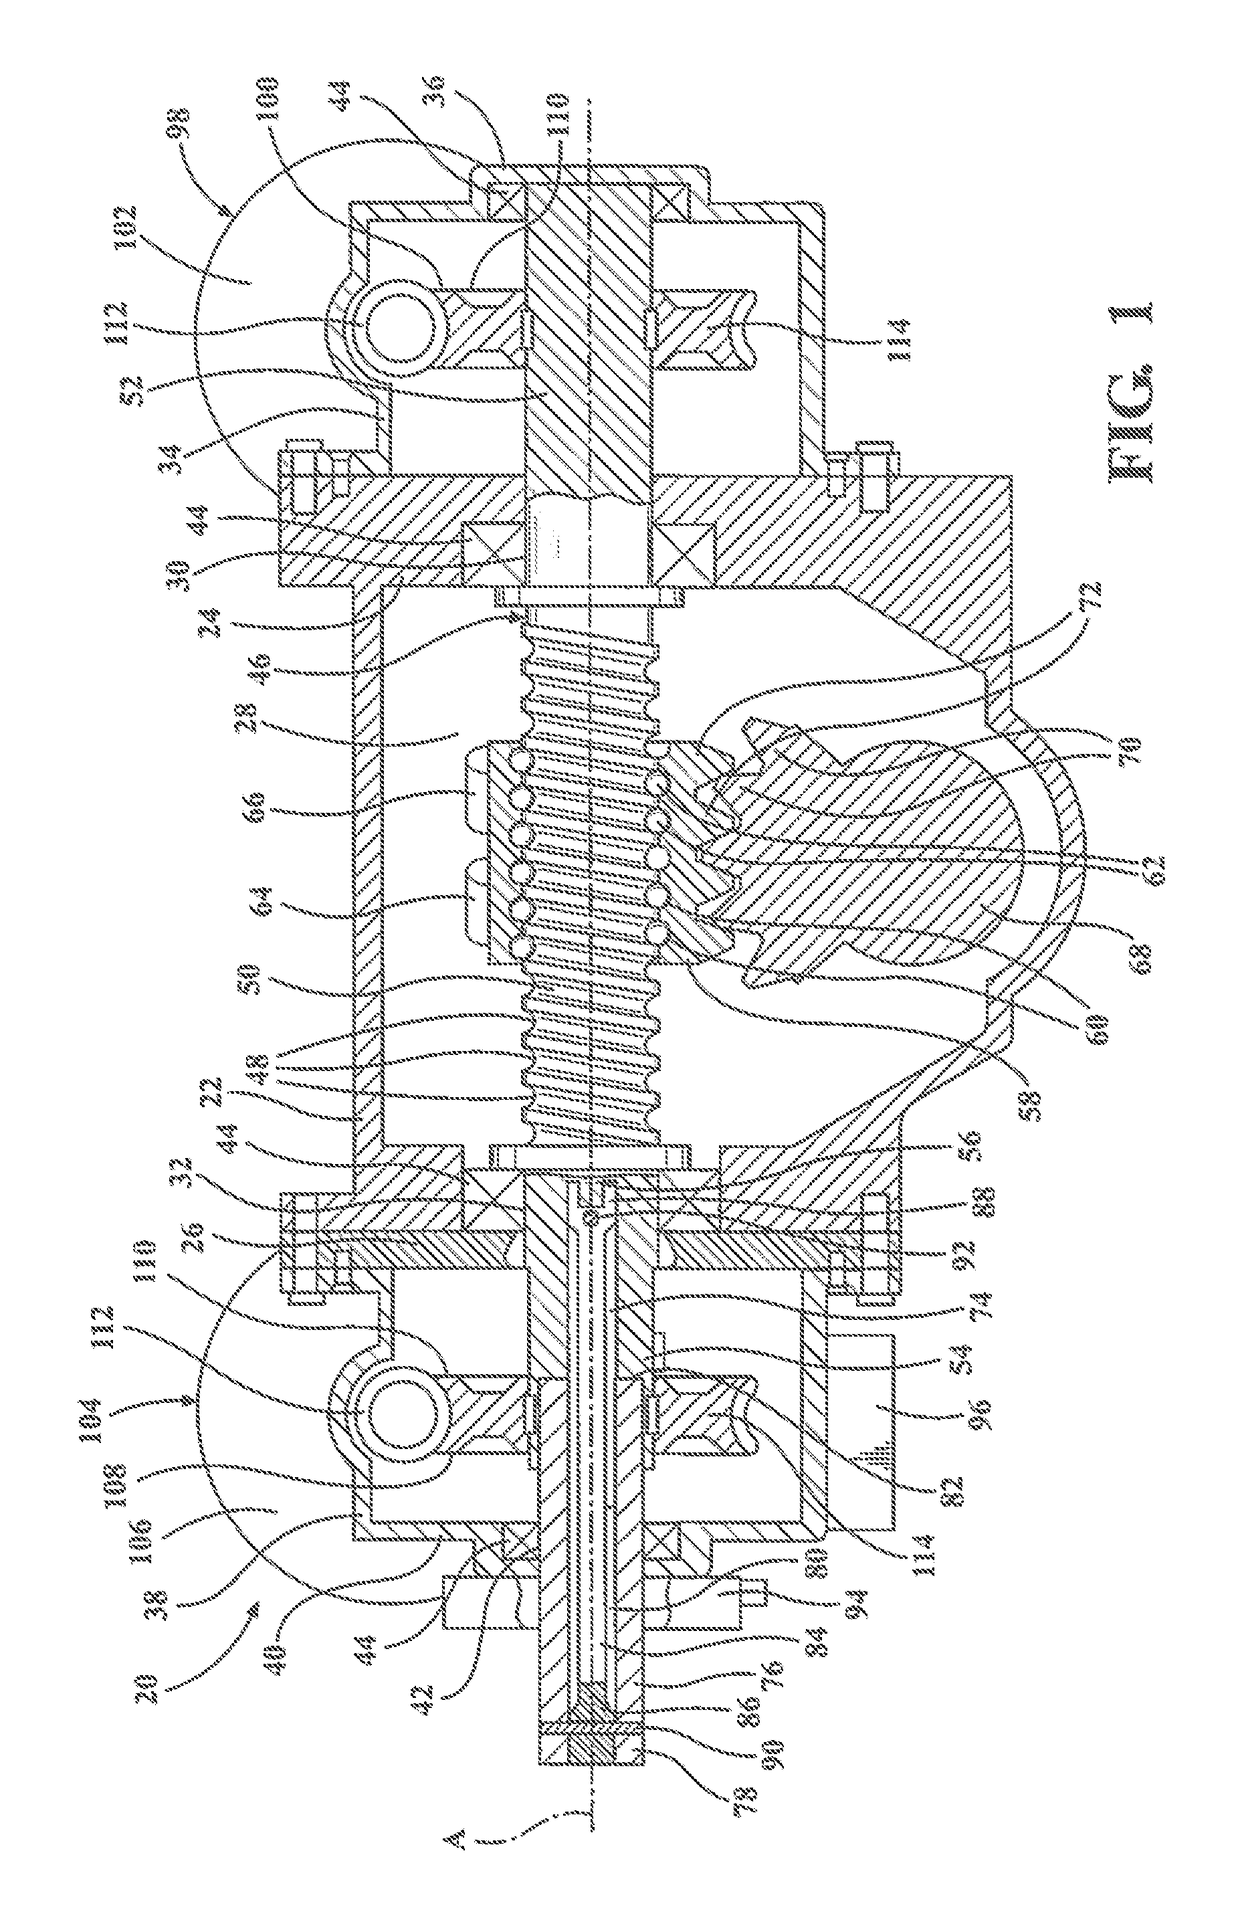 Electrically-powered recirculating-ball steering gear assembly